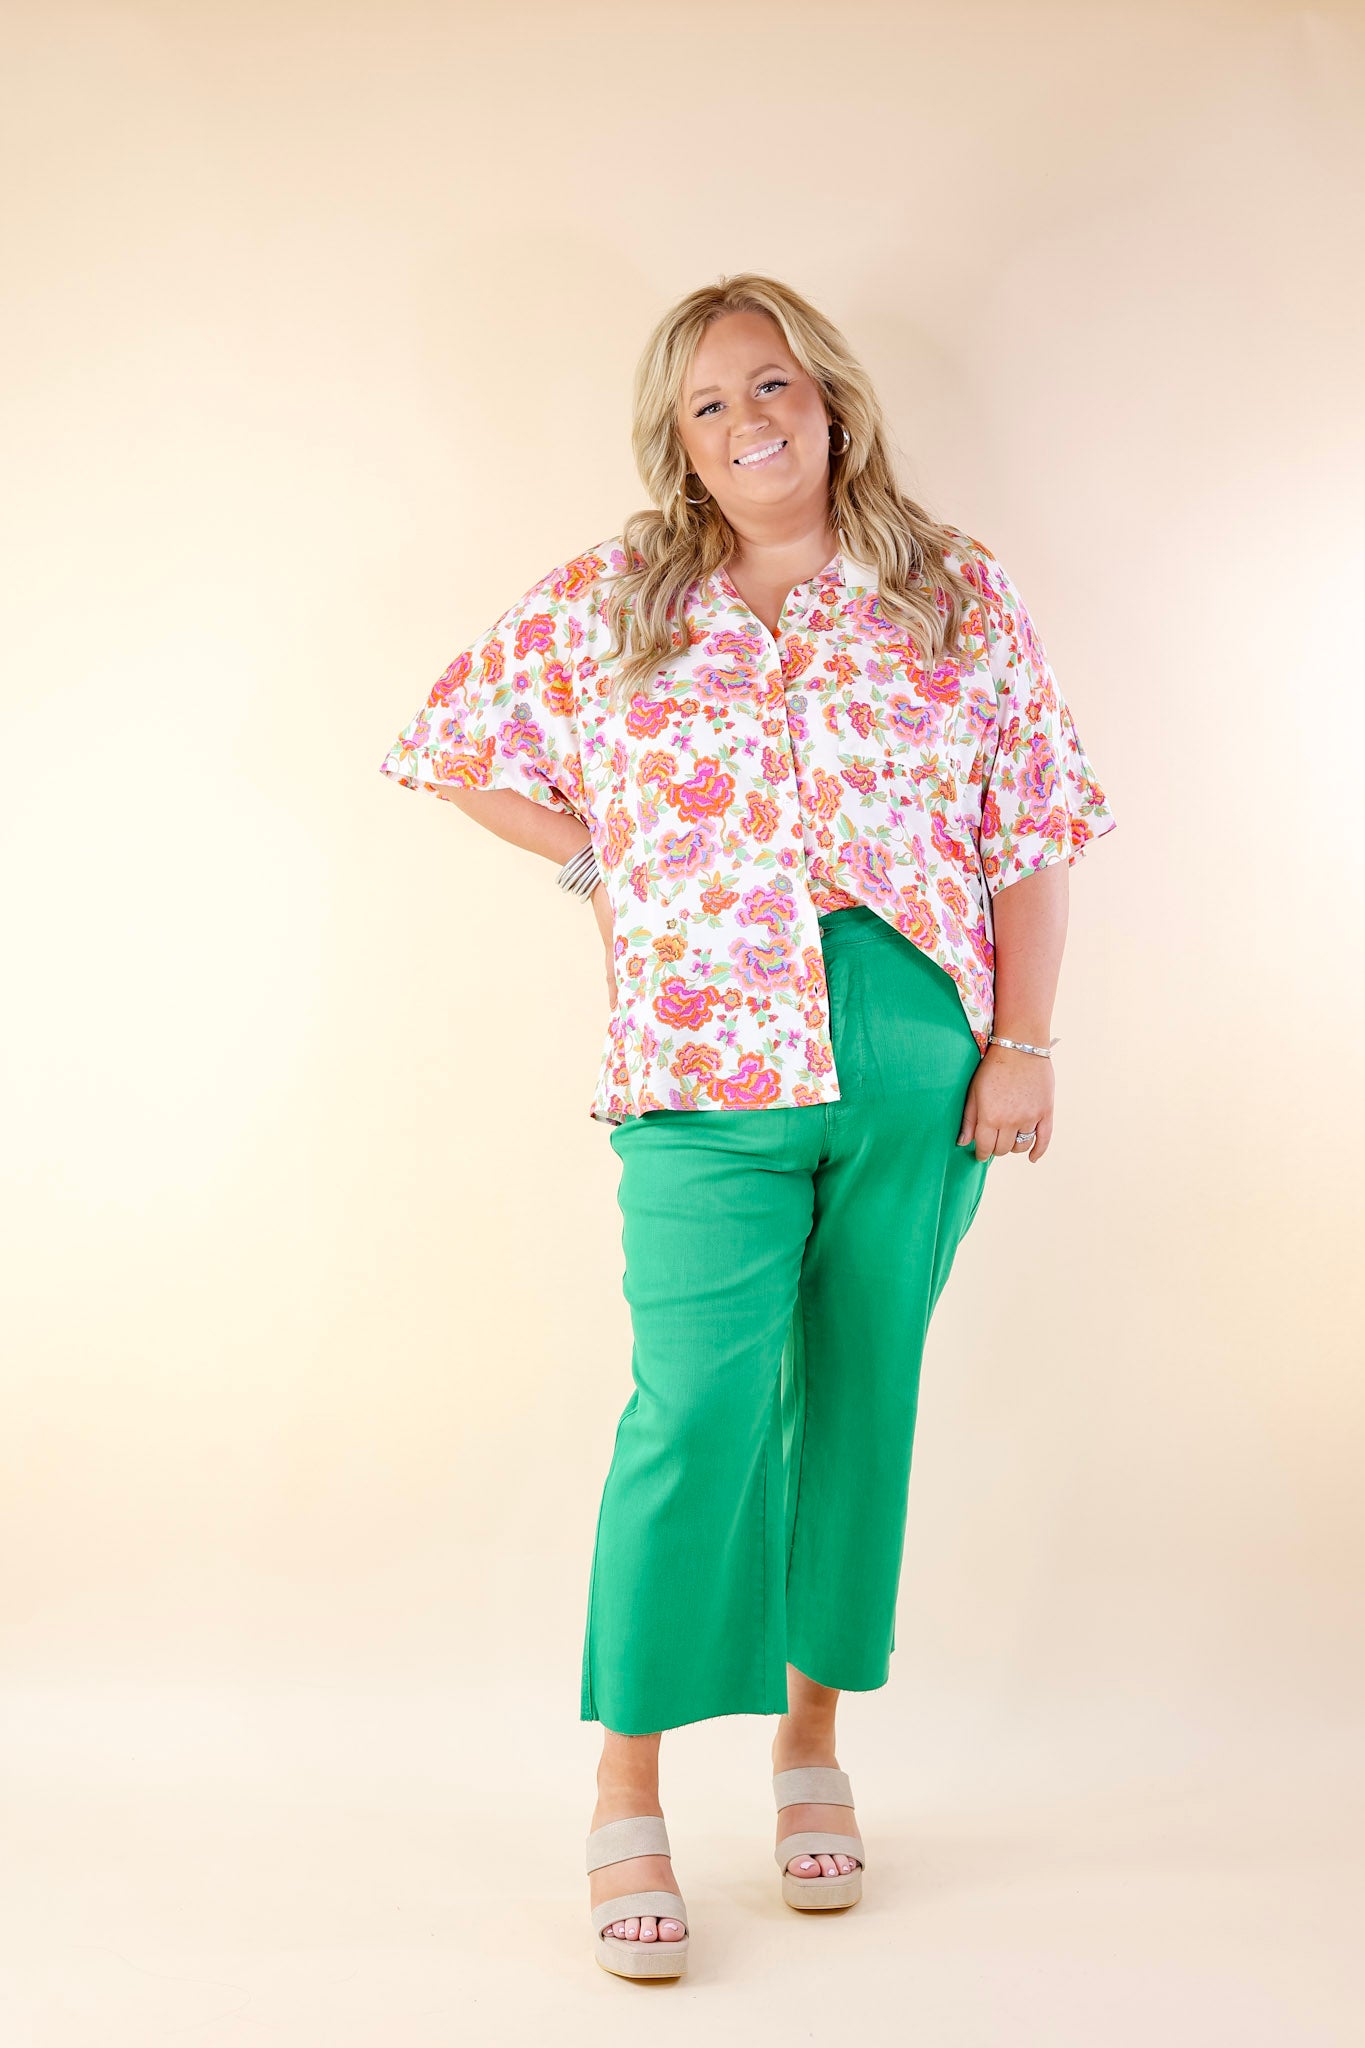 Enchanted Blooms Floral Print Top with Collar in Off White - Giddy Up Glamour Boutique